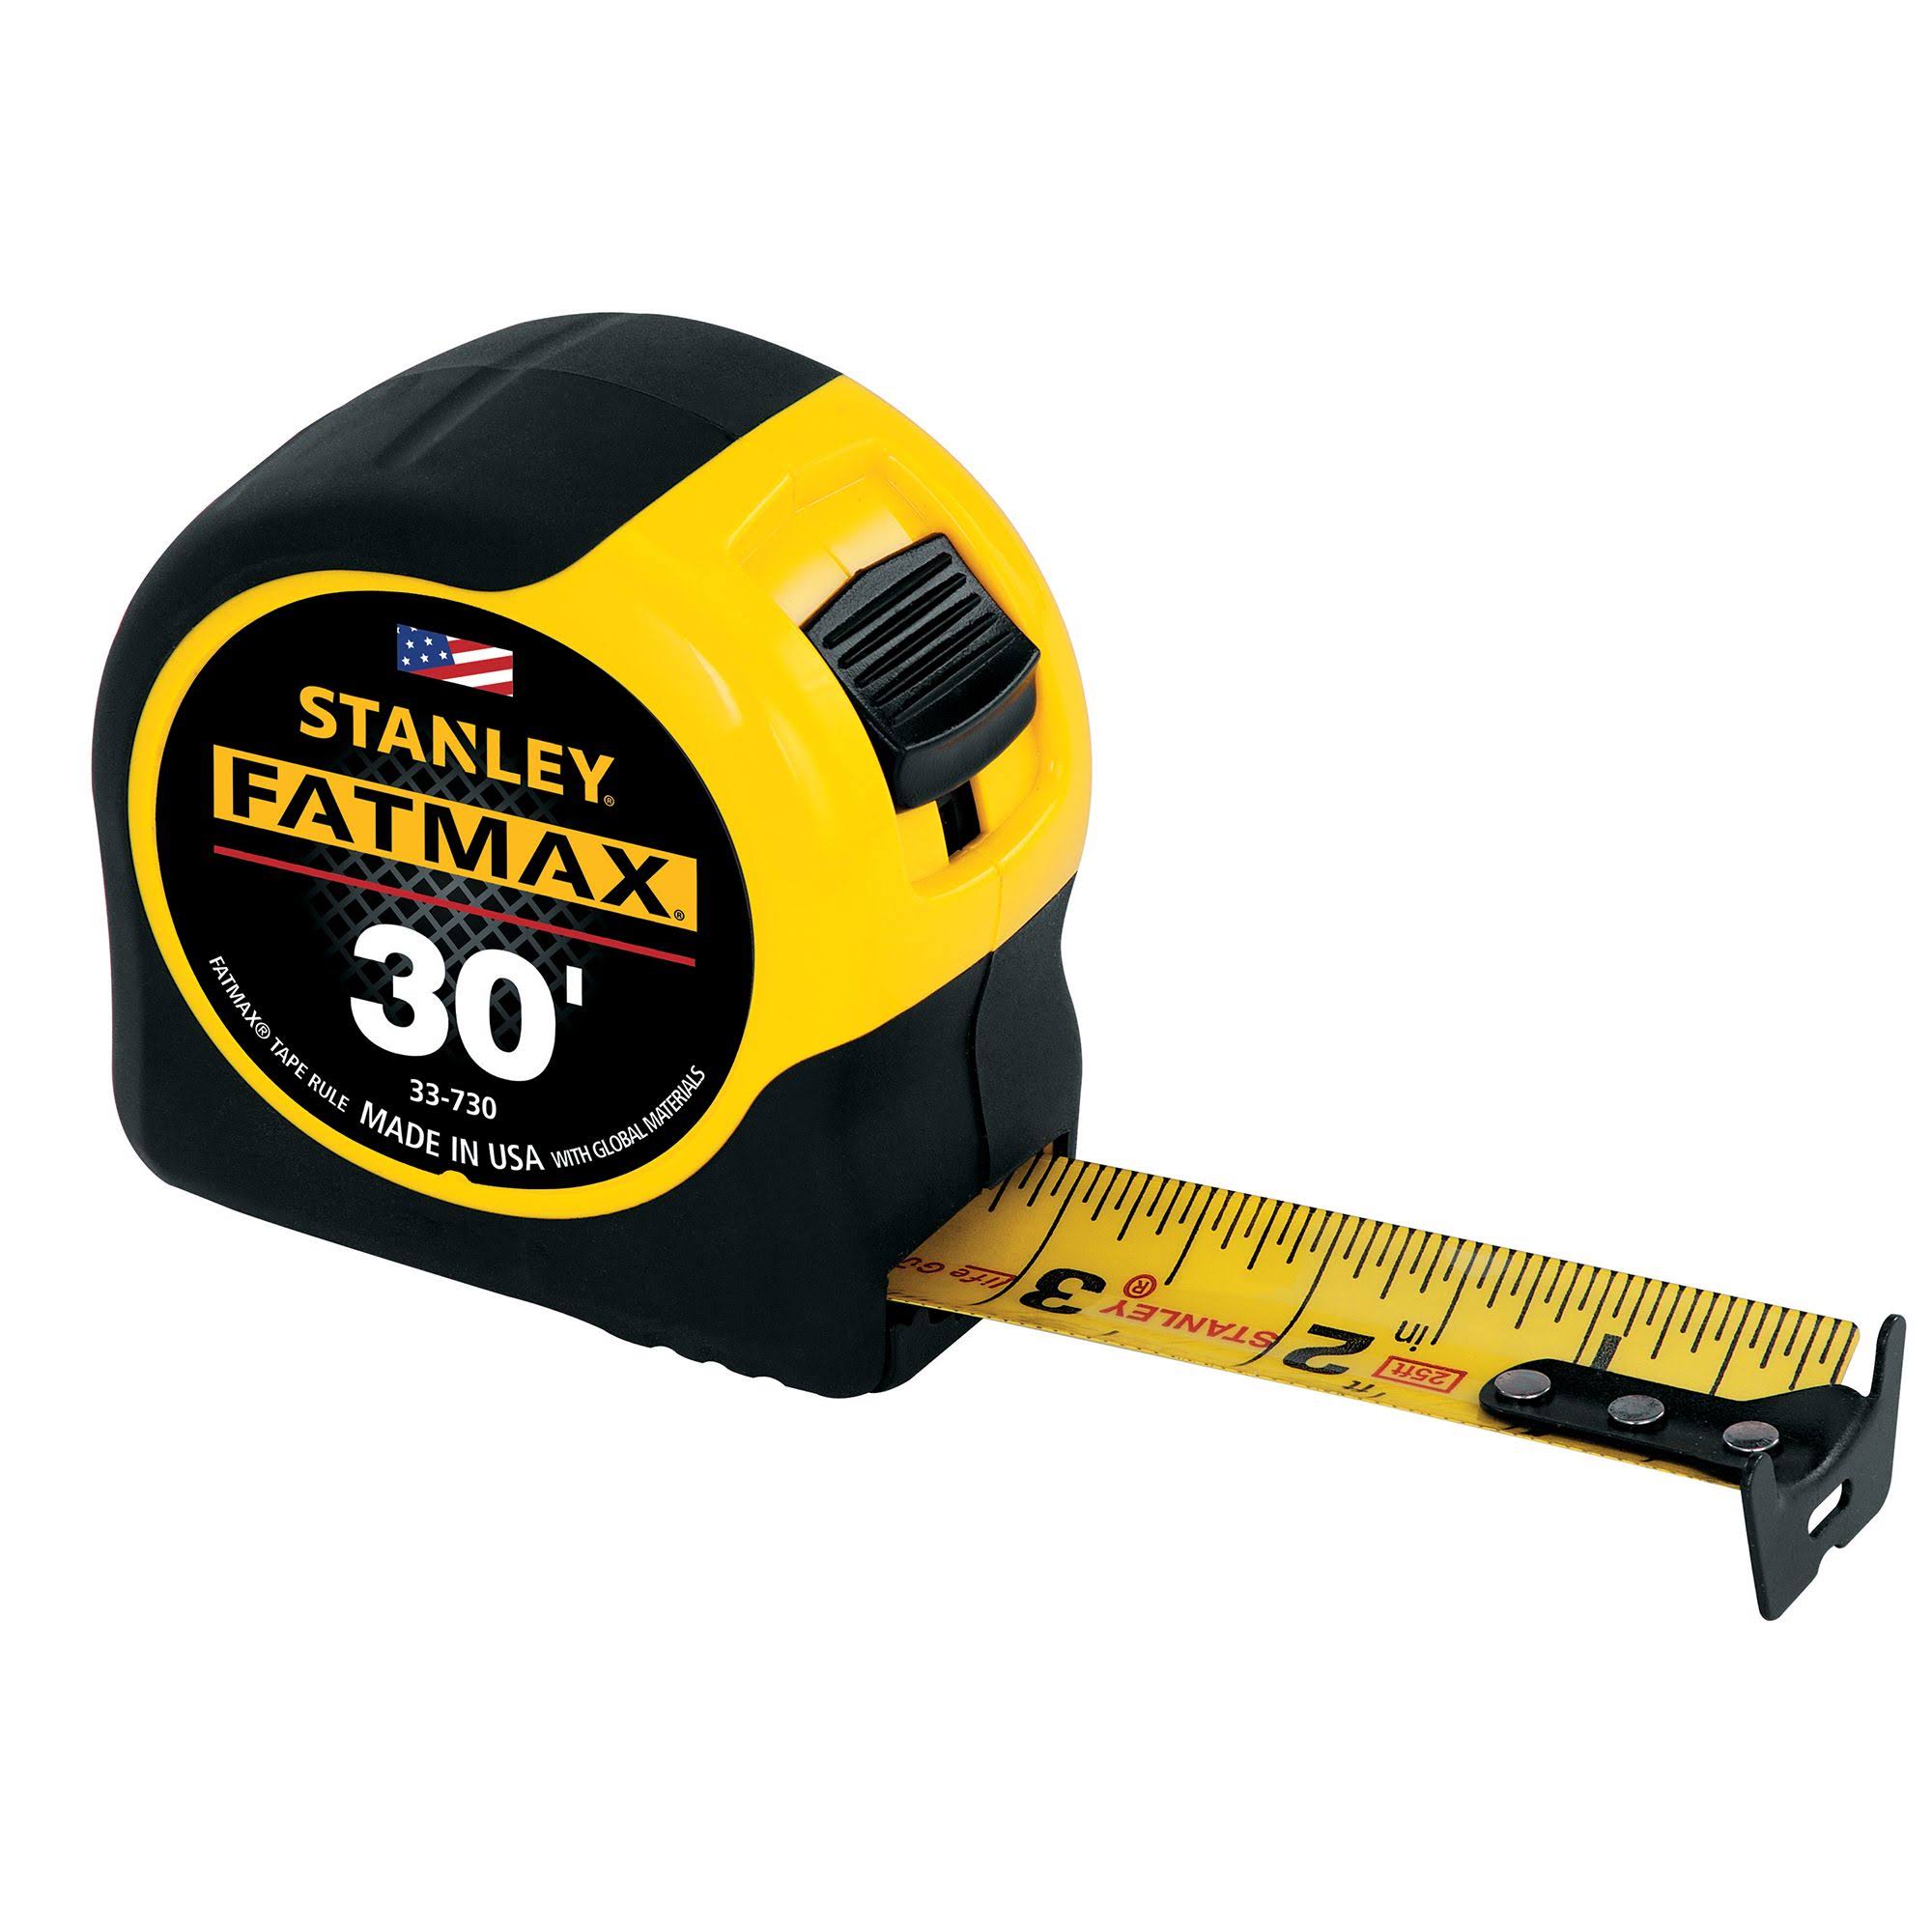 Stanley FatMax Measuring Tape - 30', Yellow and Black